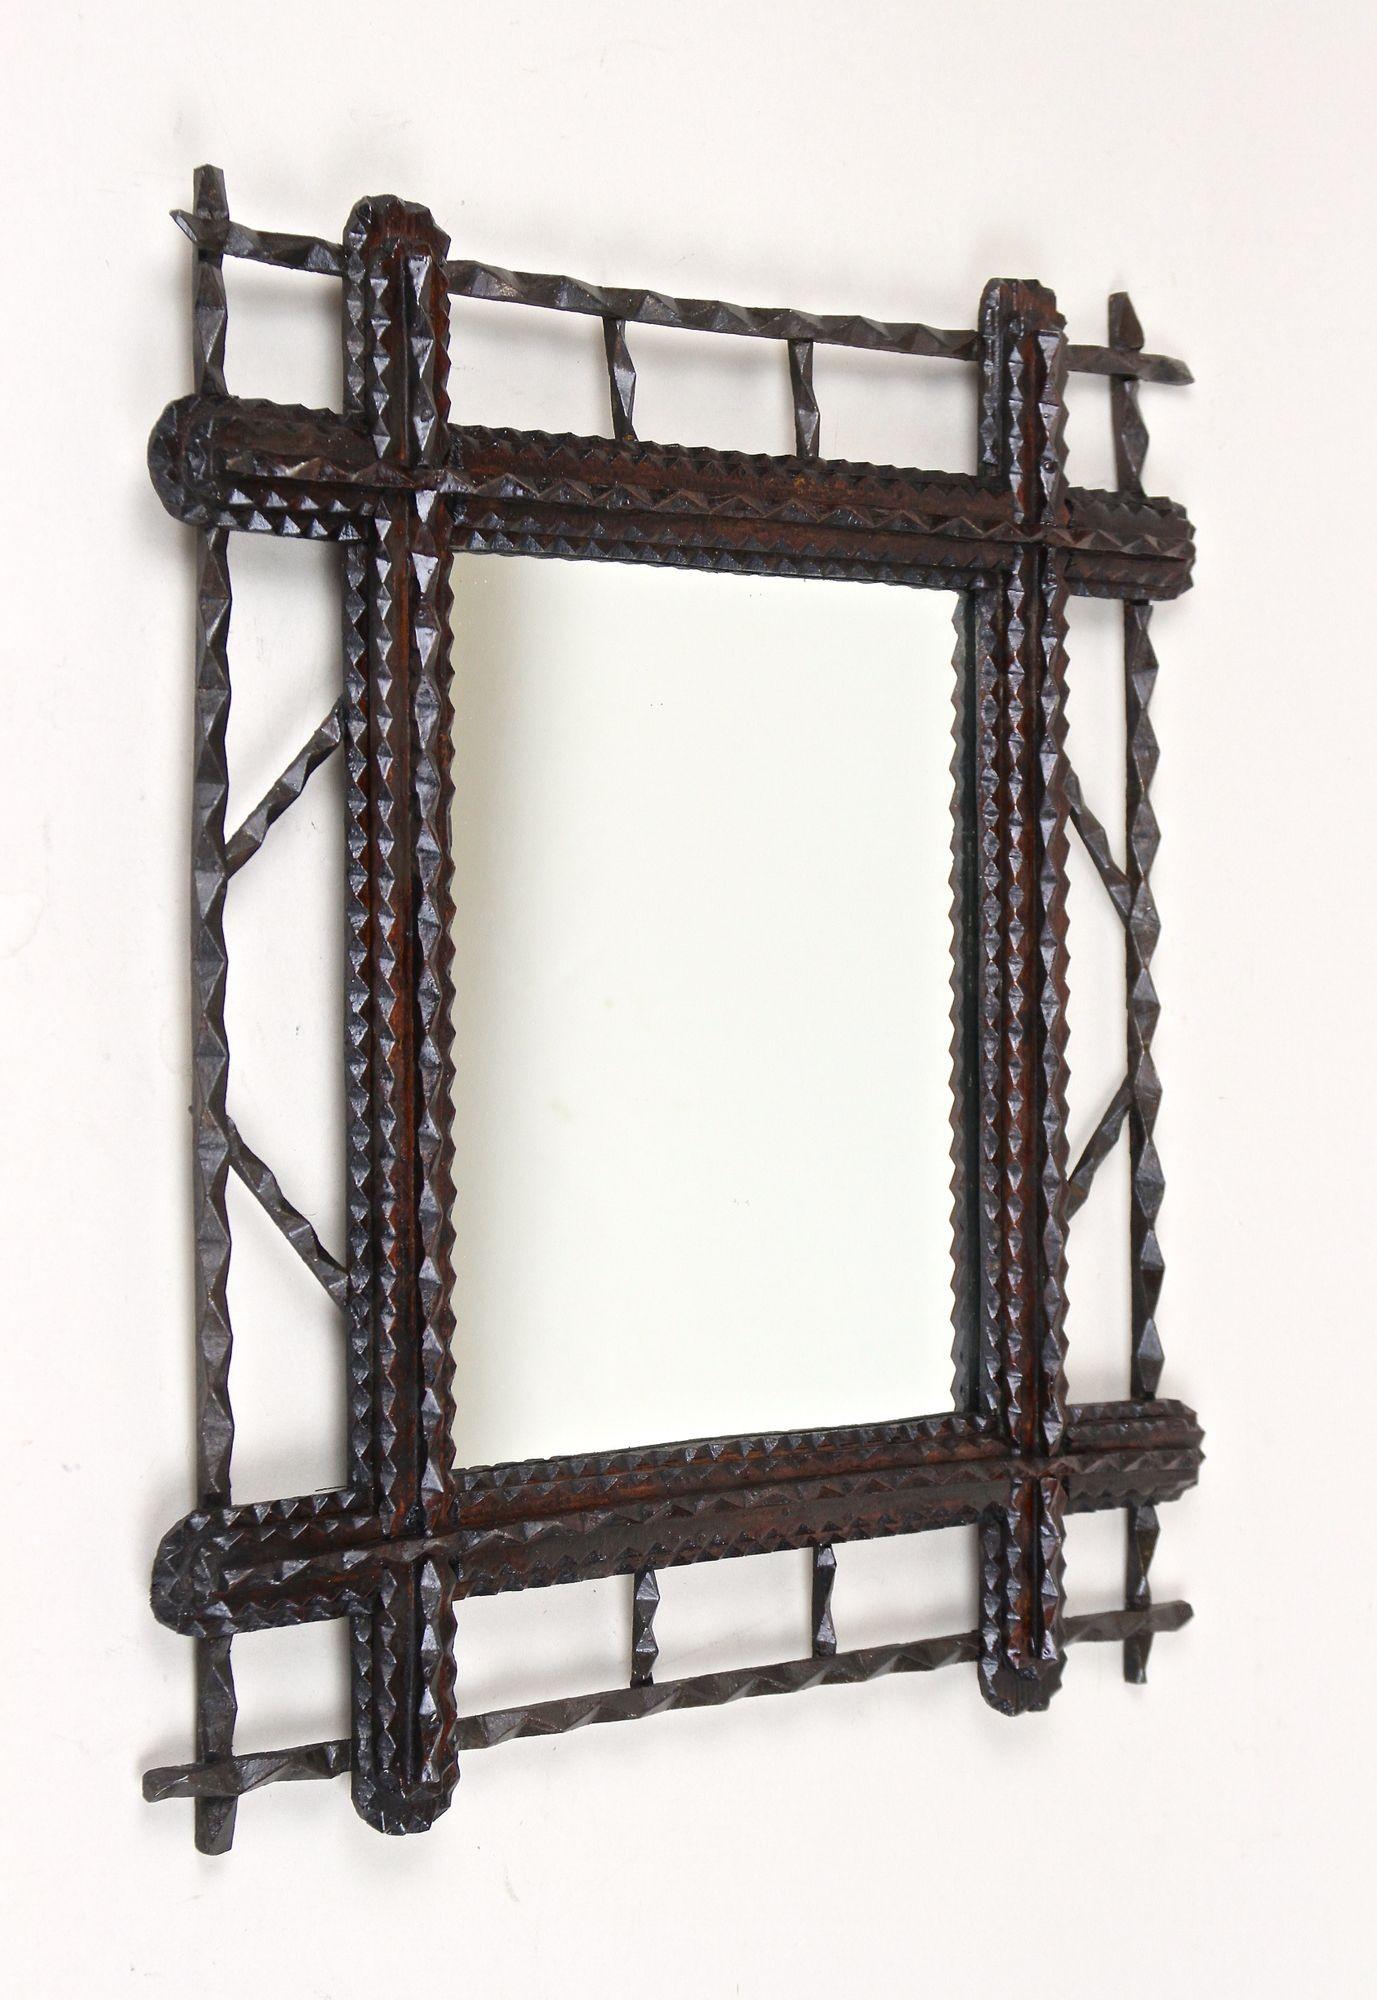 One of a kind Tramp Art Wall Mirror from the mid 19th century in Austria. Artfully handcrafted around 1860, this extraordinary rustic mirror has been effortfully carved out of basswood and comes in great original condition with a dark brown stained